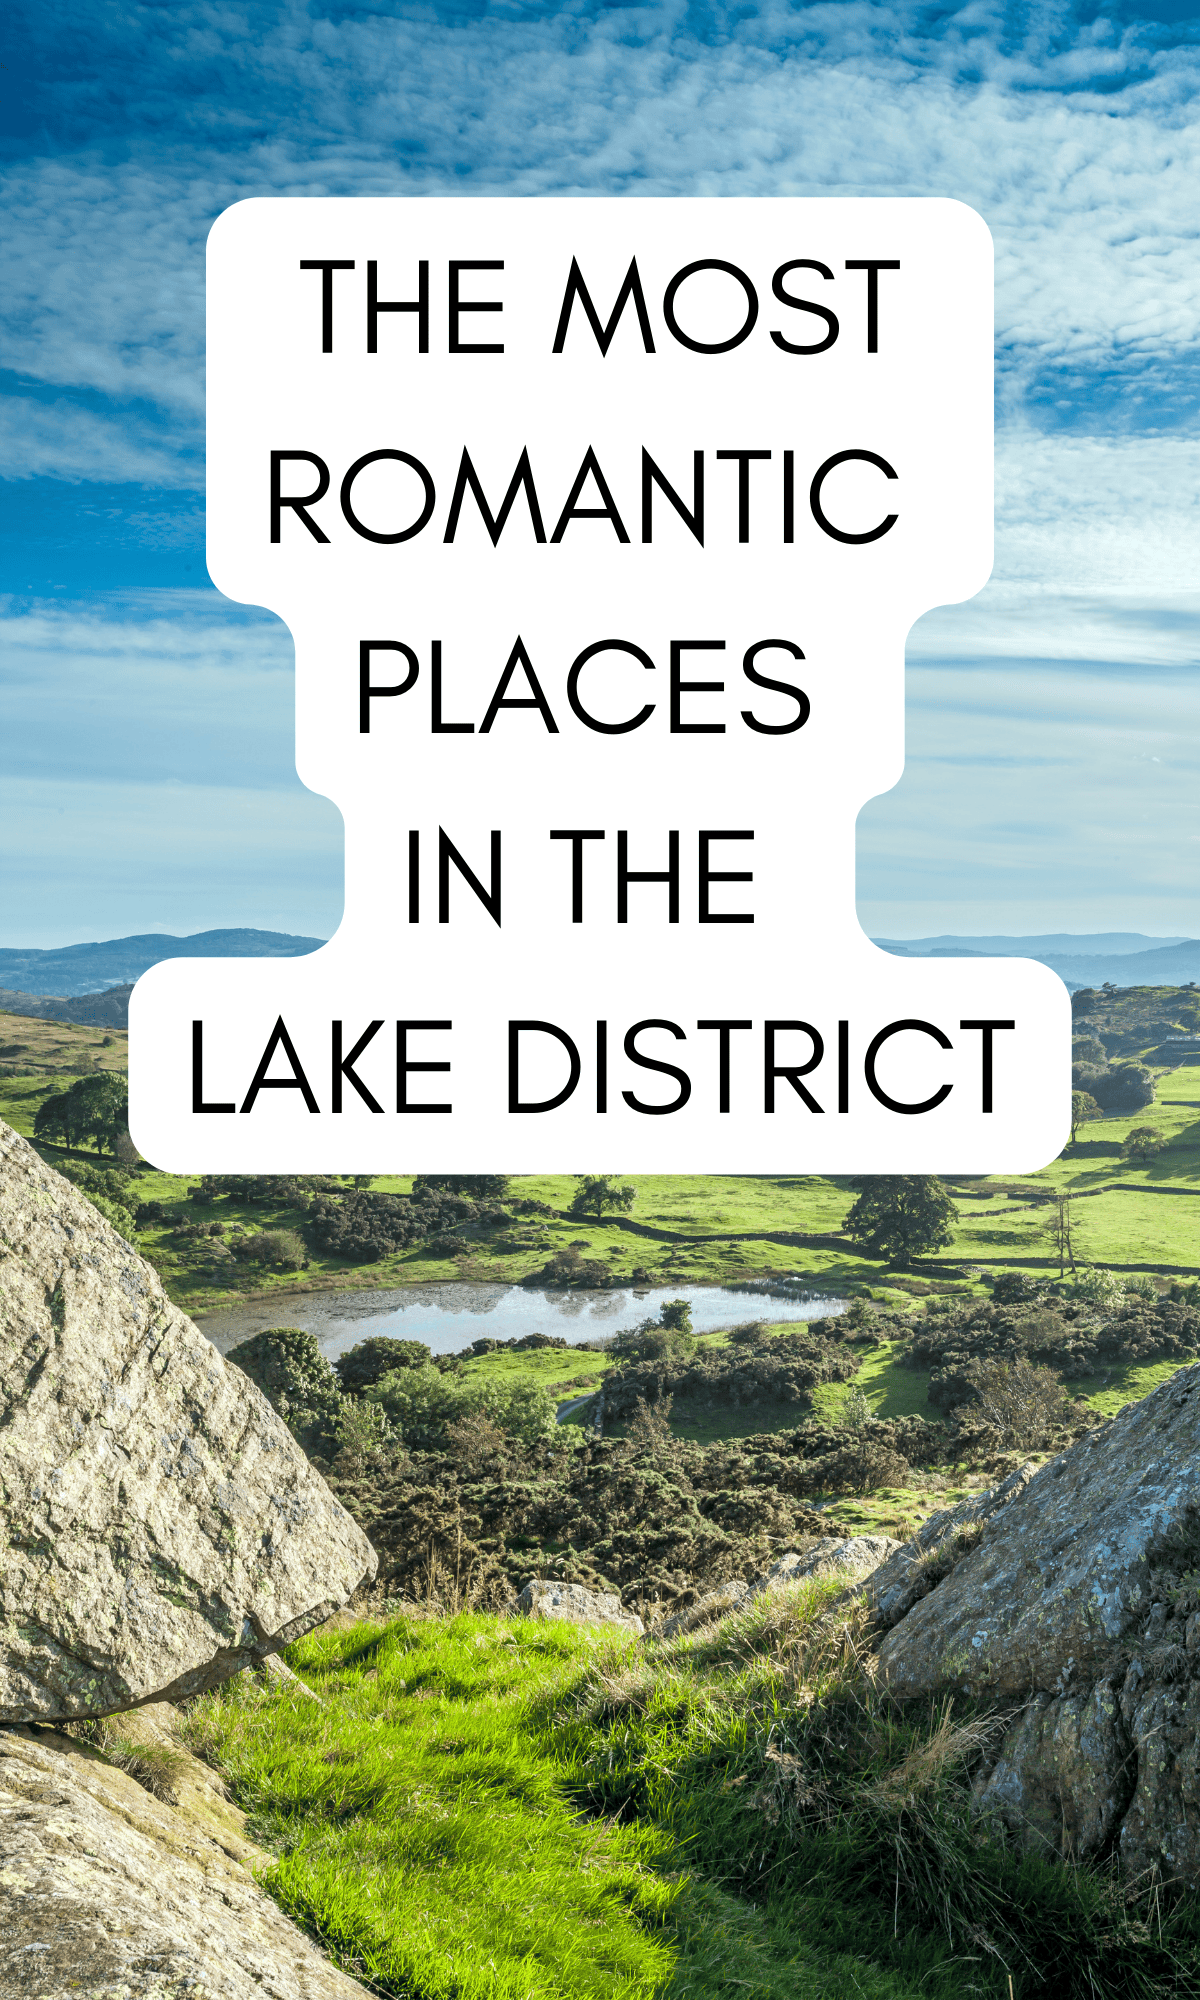 the most romantic places in the lake district, best proposal locations or for a romantic break in the uk 